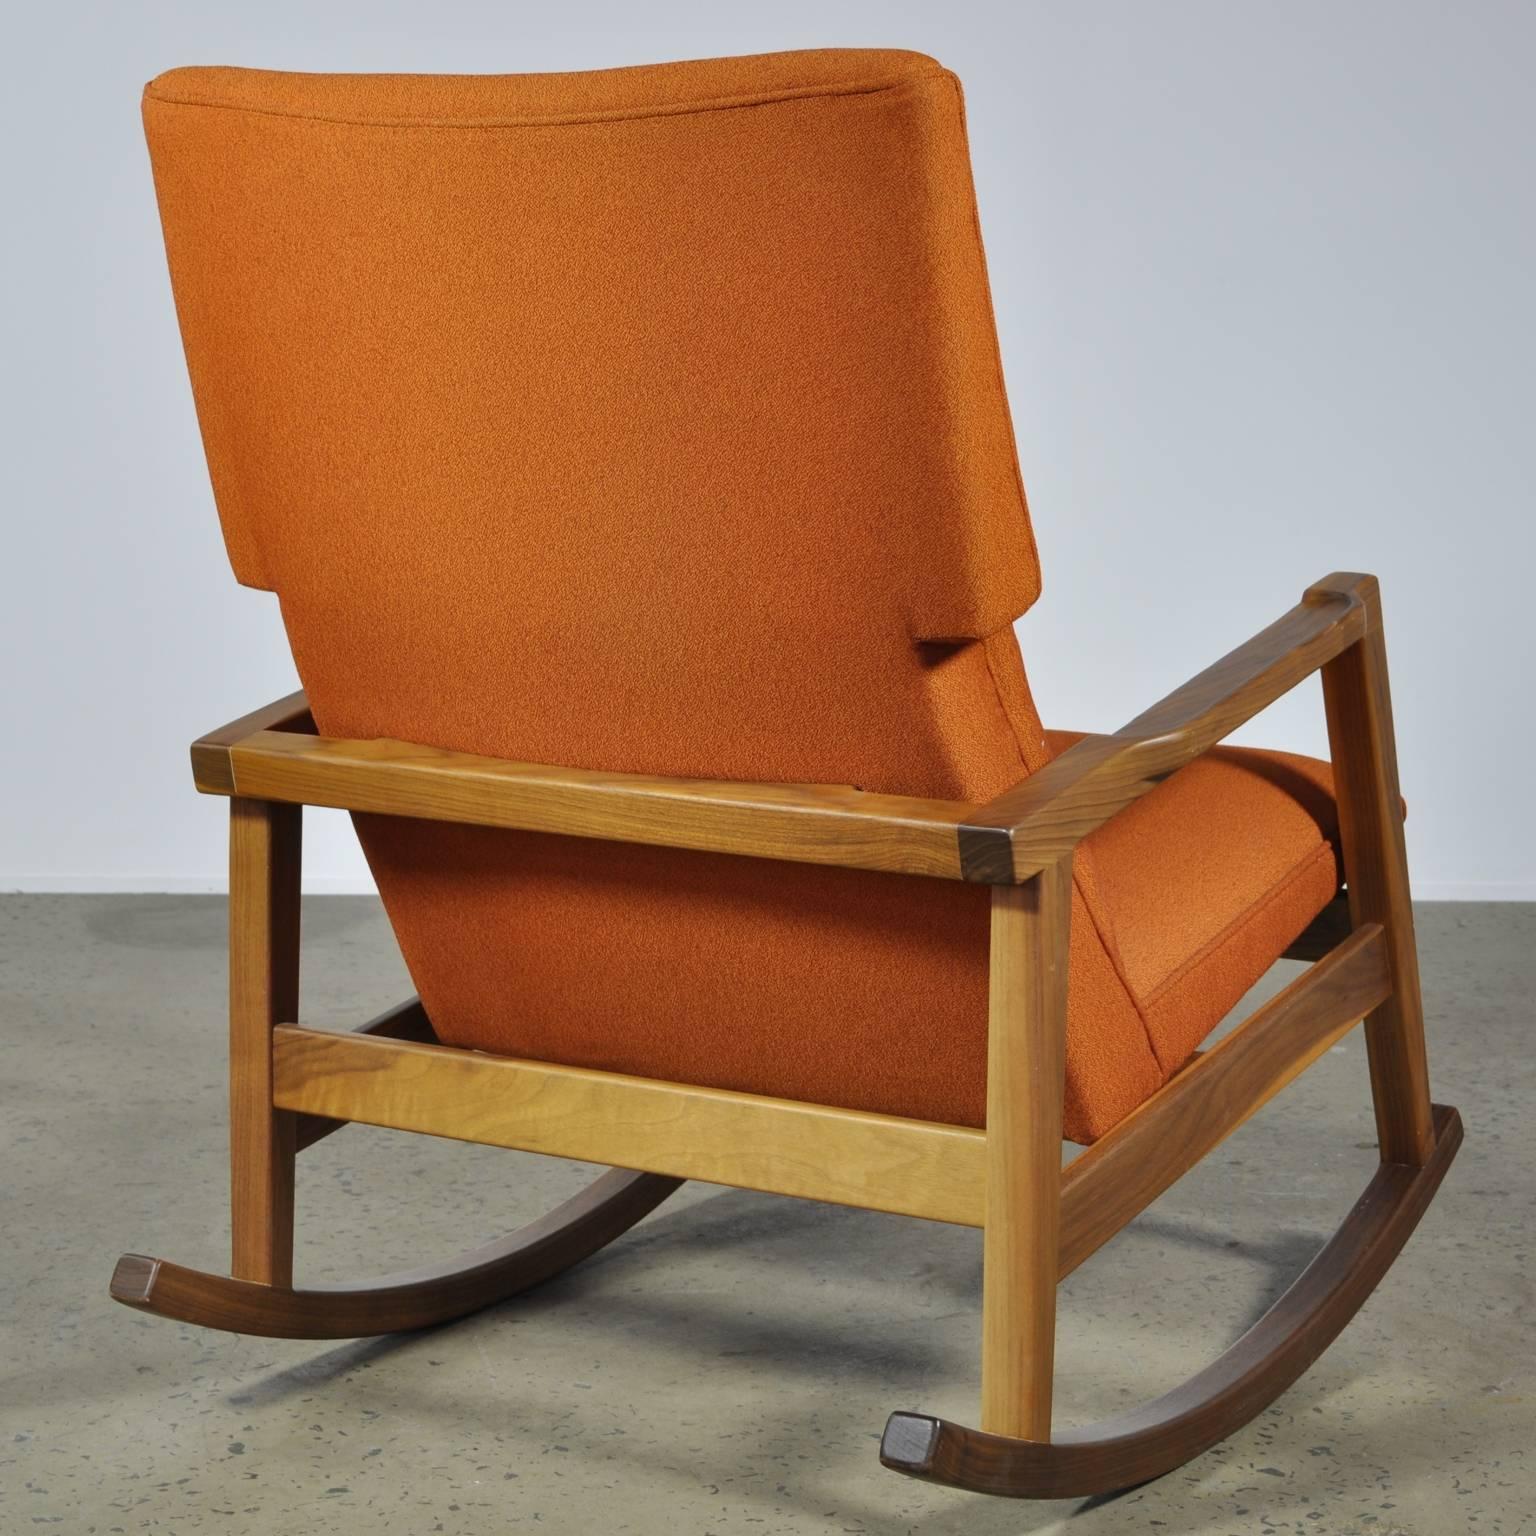 Walnut with Wool Fabric Jens Risom Rocker Chair for DWR im Zustand „Hervorragend“ in North Wollongong, New South Wales